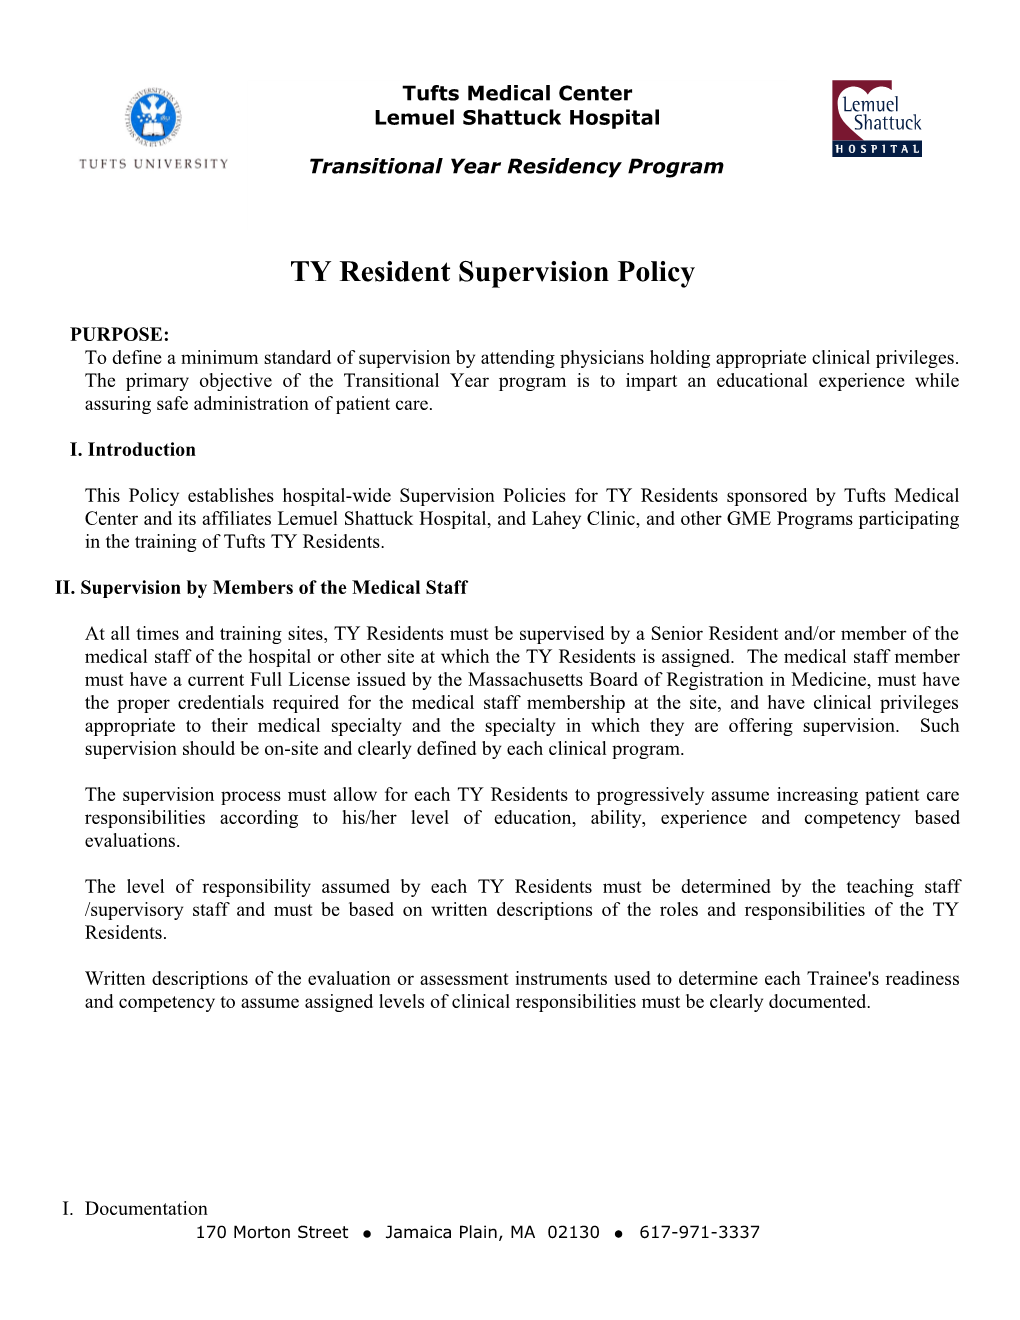 TY Resident Supervision Policy